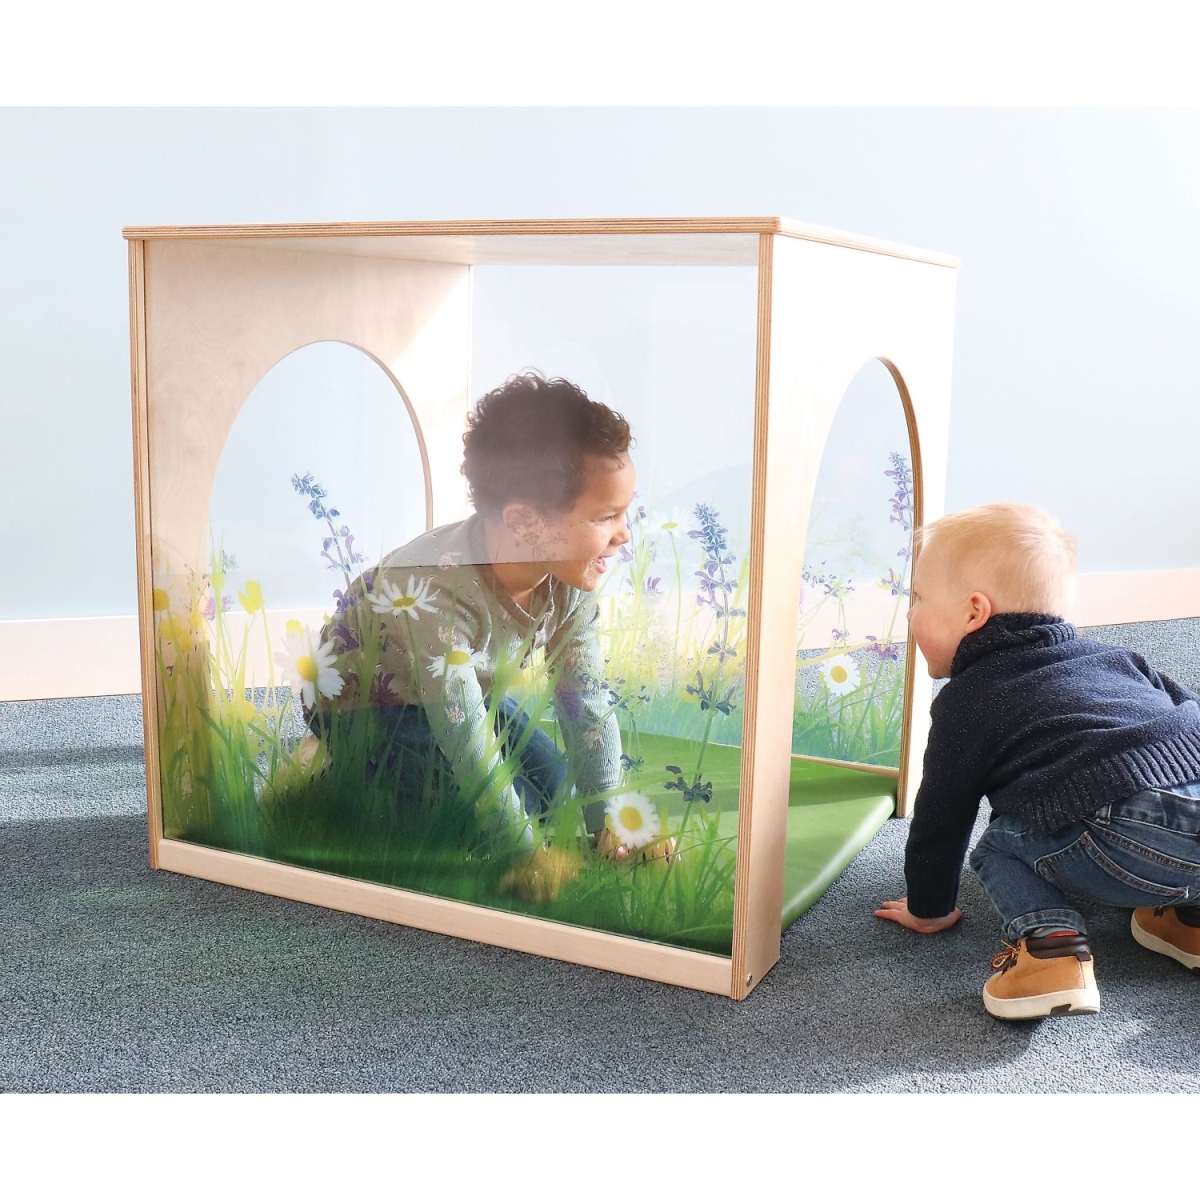 Wb2452 Nature View Playhouse Cube With Floor Mat Set, Natural